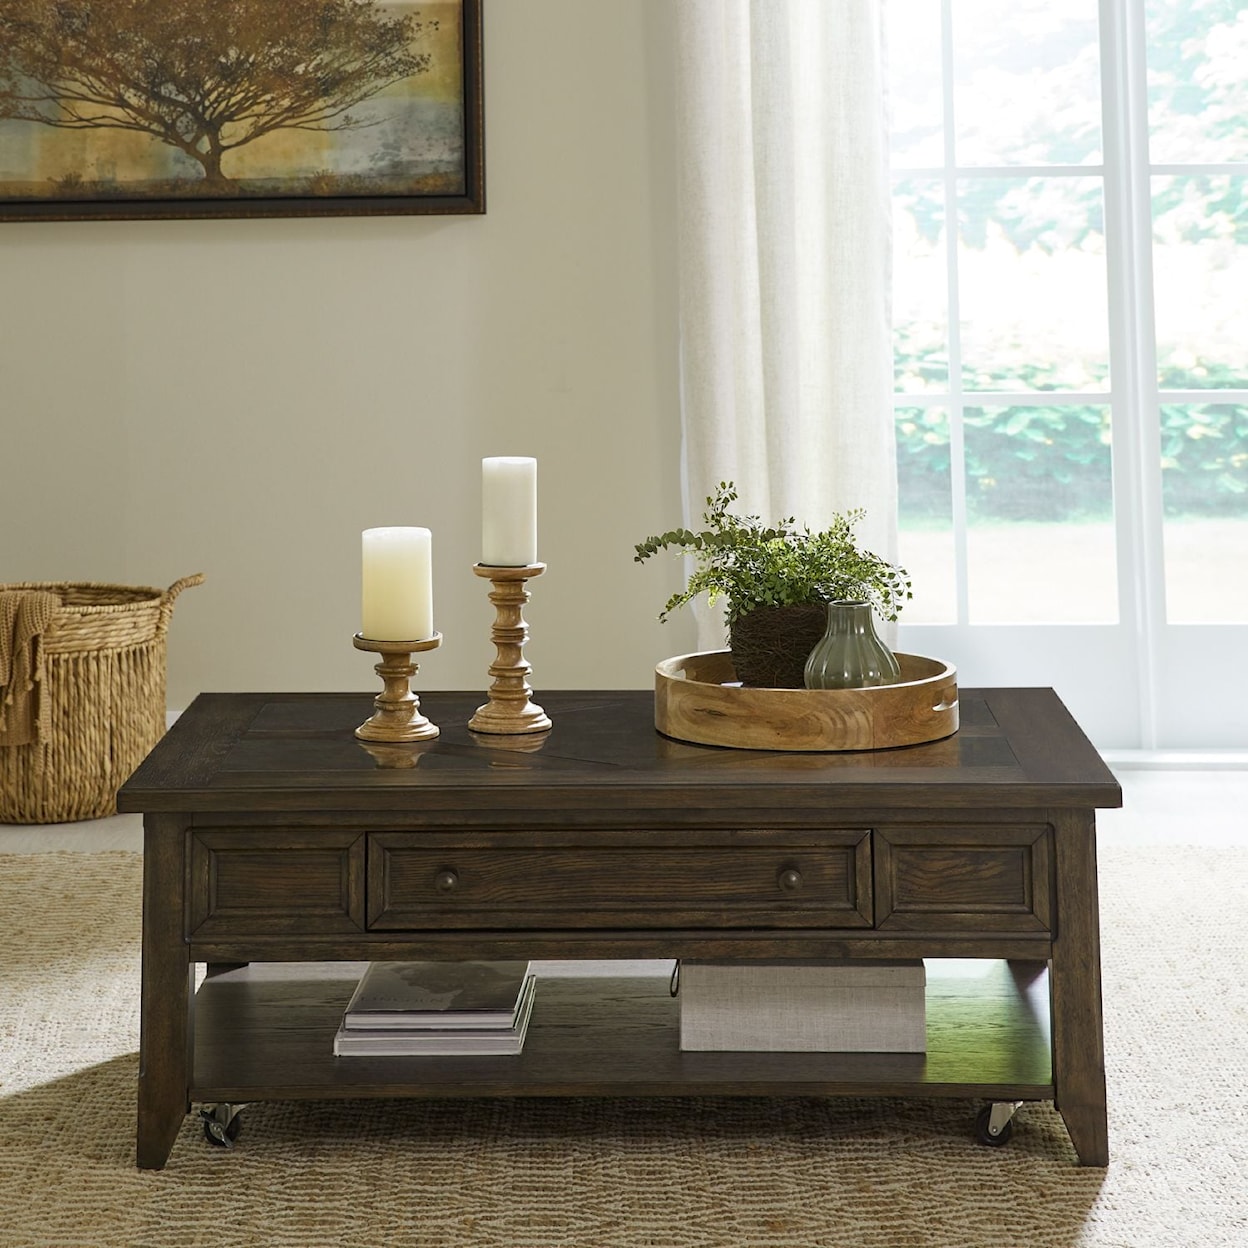 Libby Paradise Valley Rectangular Cocktail Table